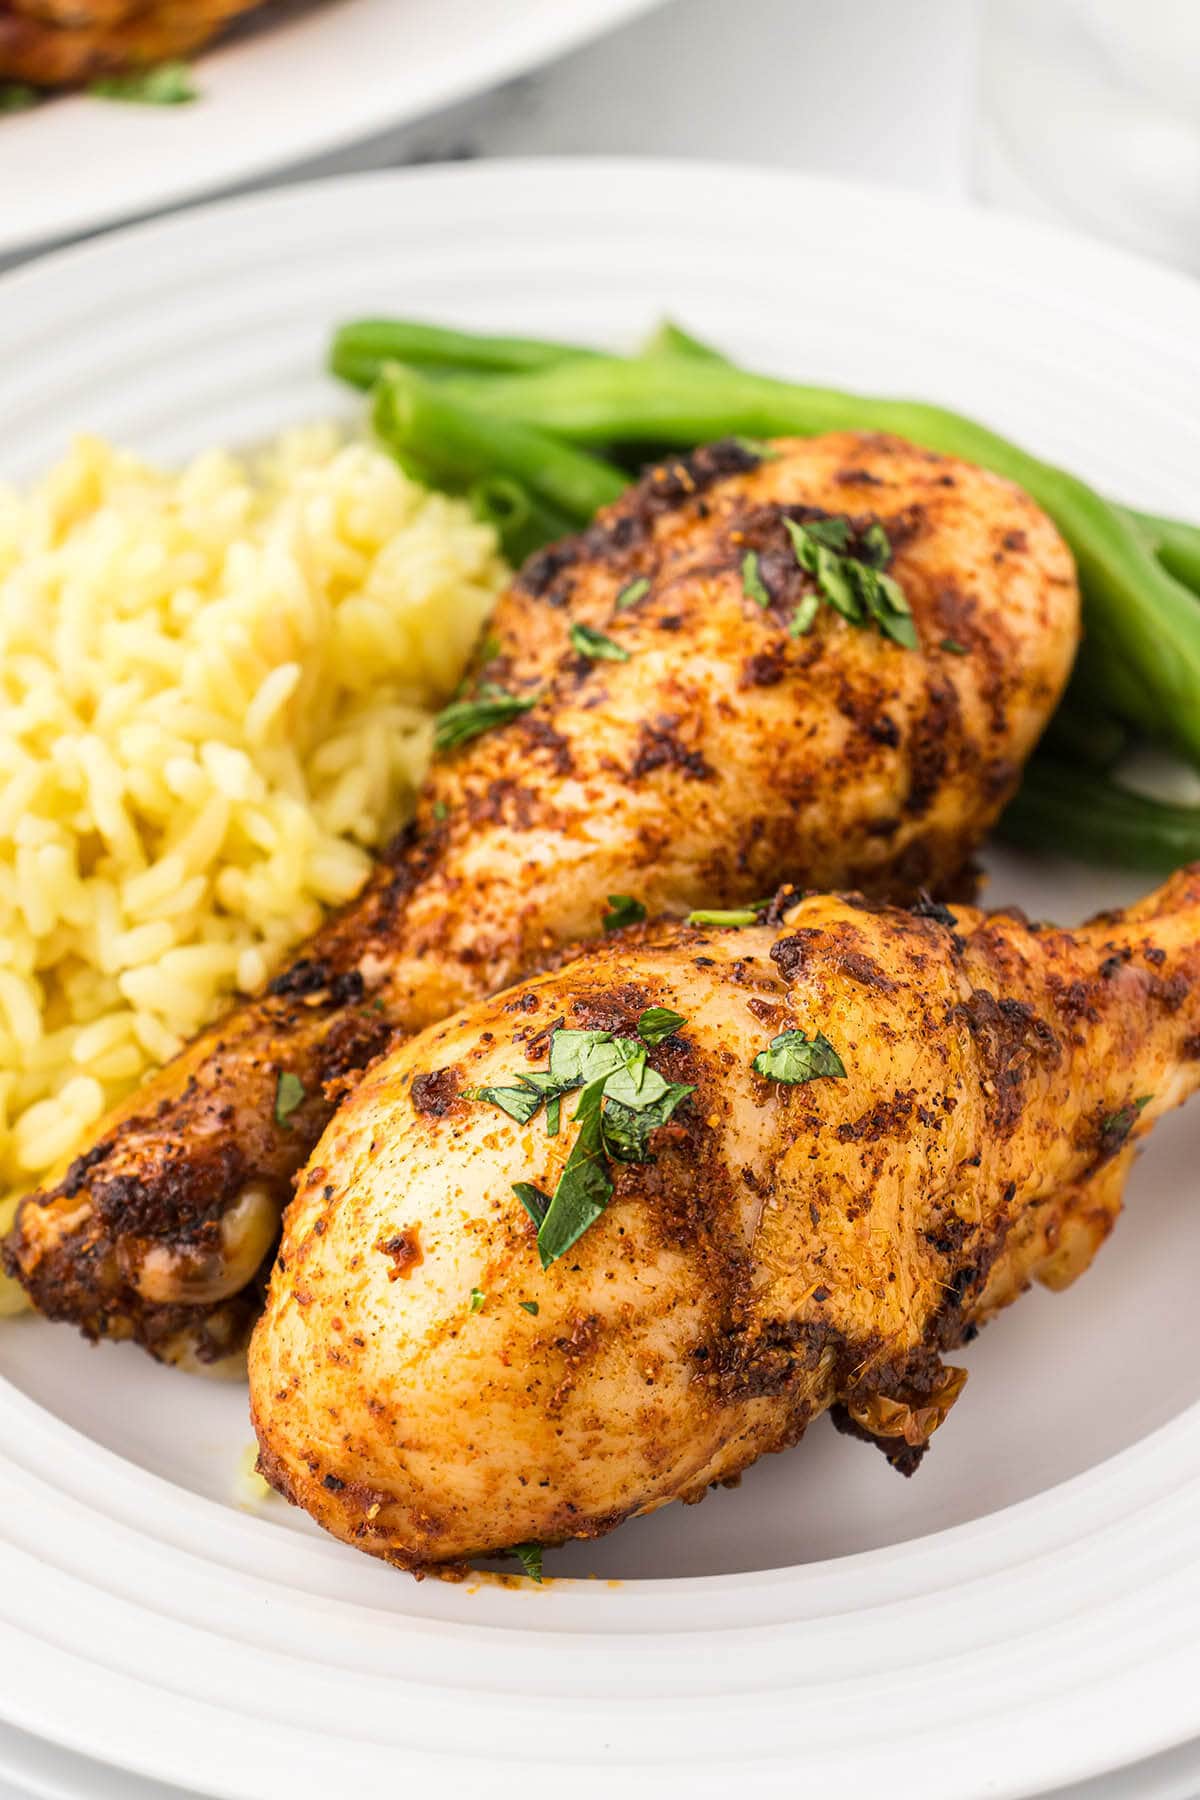 Grilled chicken legs on a plate with rice and steamed green beans.